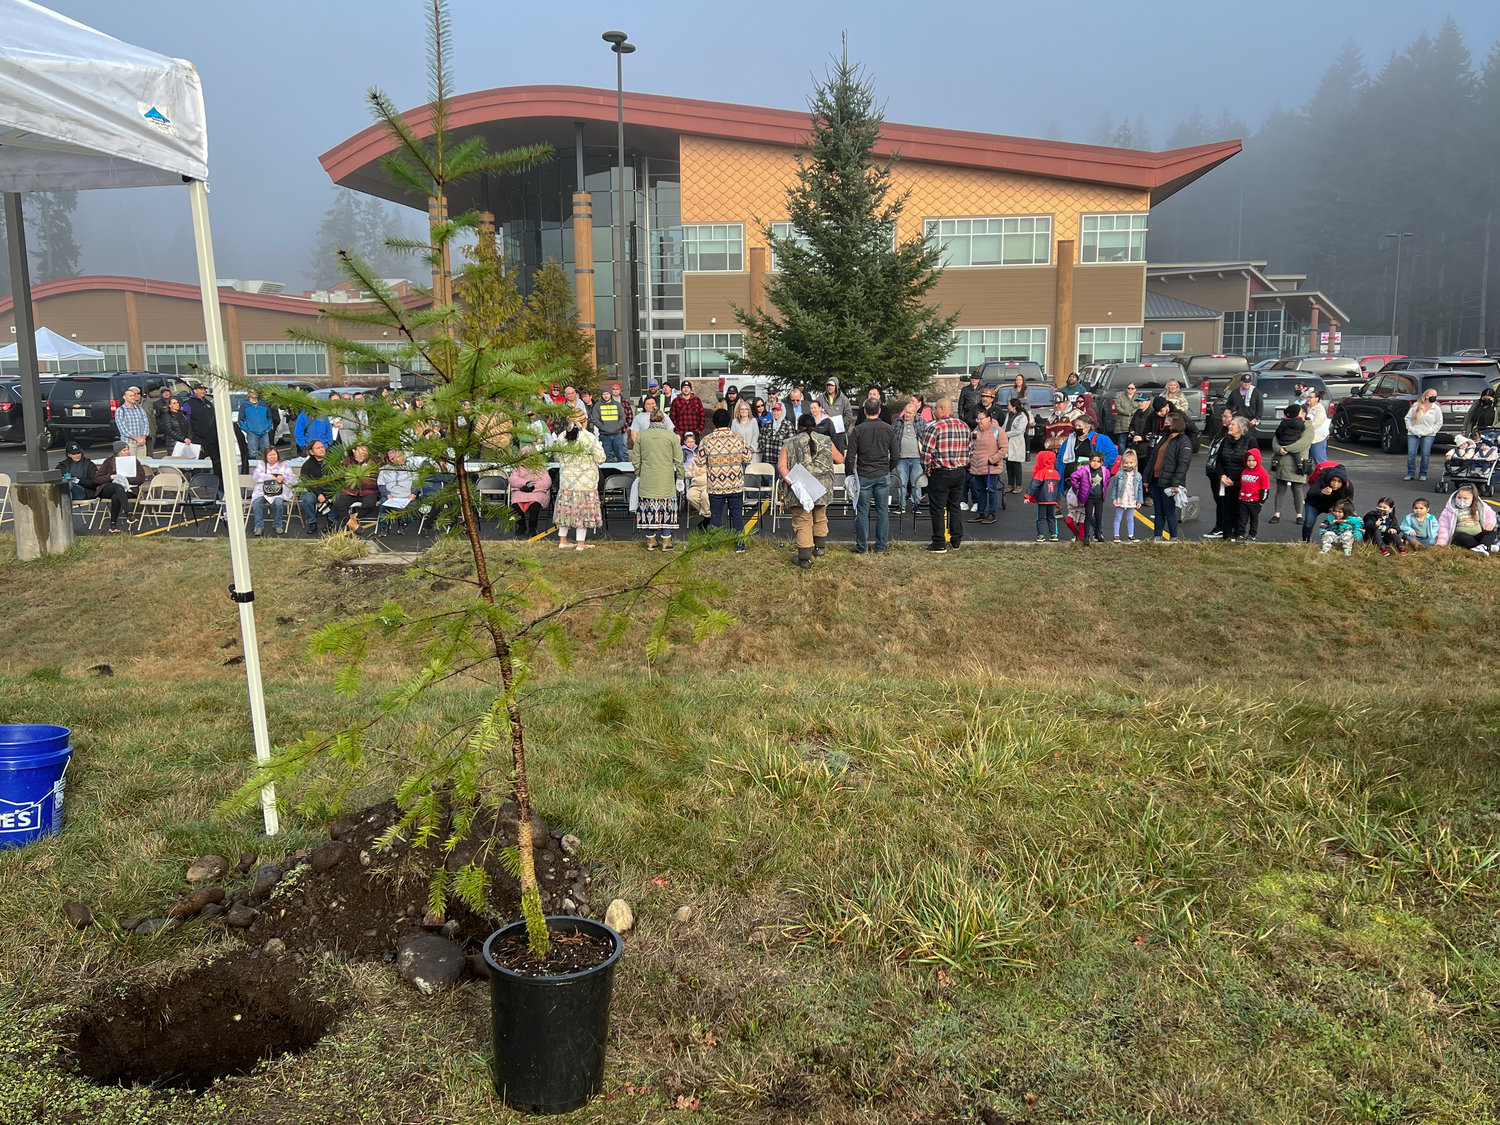 A seedling descendant from the original spruce tree that the Medicine Creek Treaty was signed under back in 1854 waits to be planted  during a ceremony commemorating the 169th anniversary of the treaty signing.